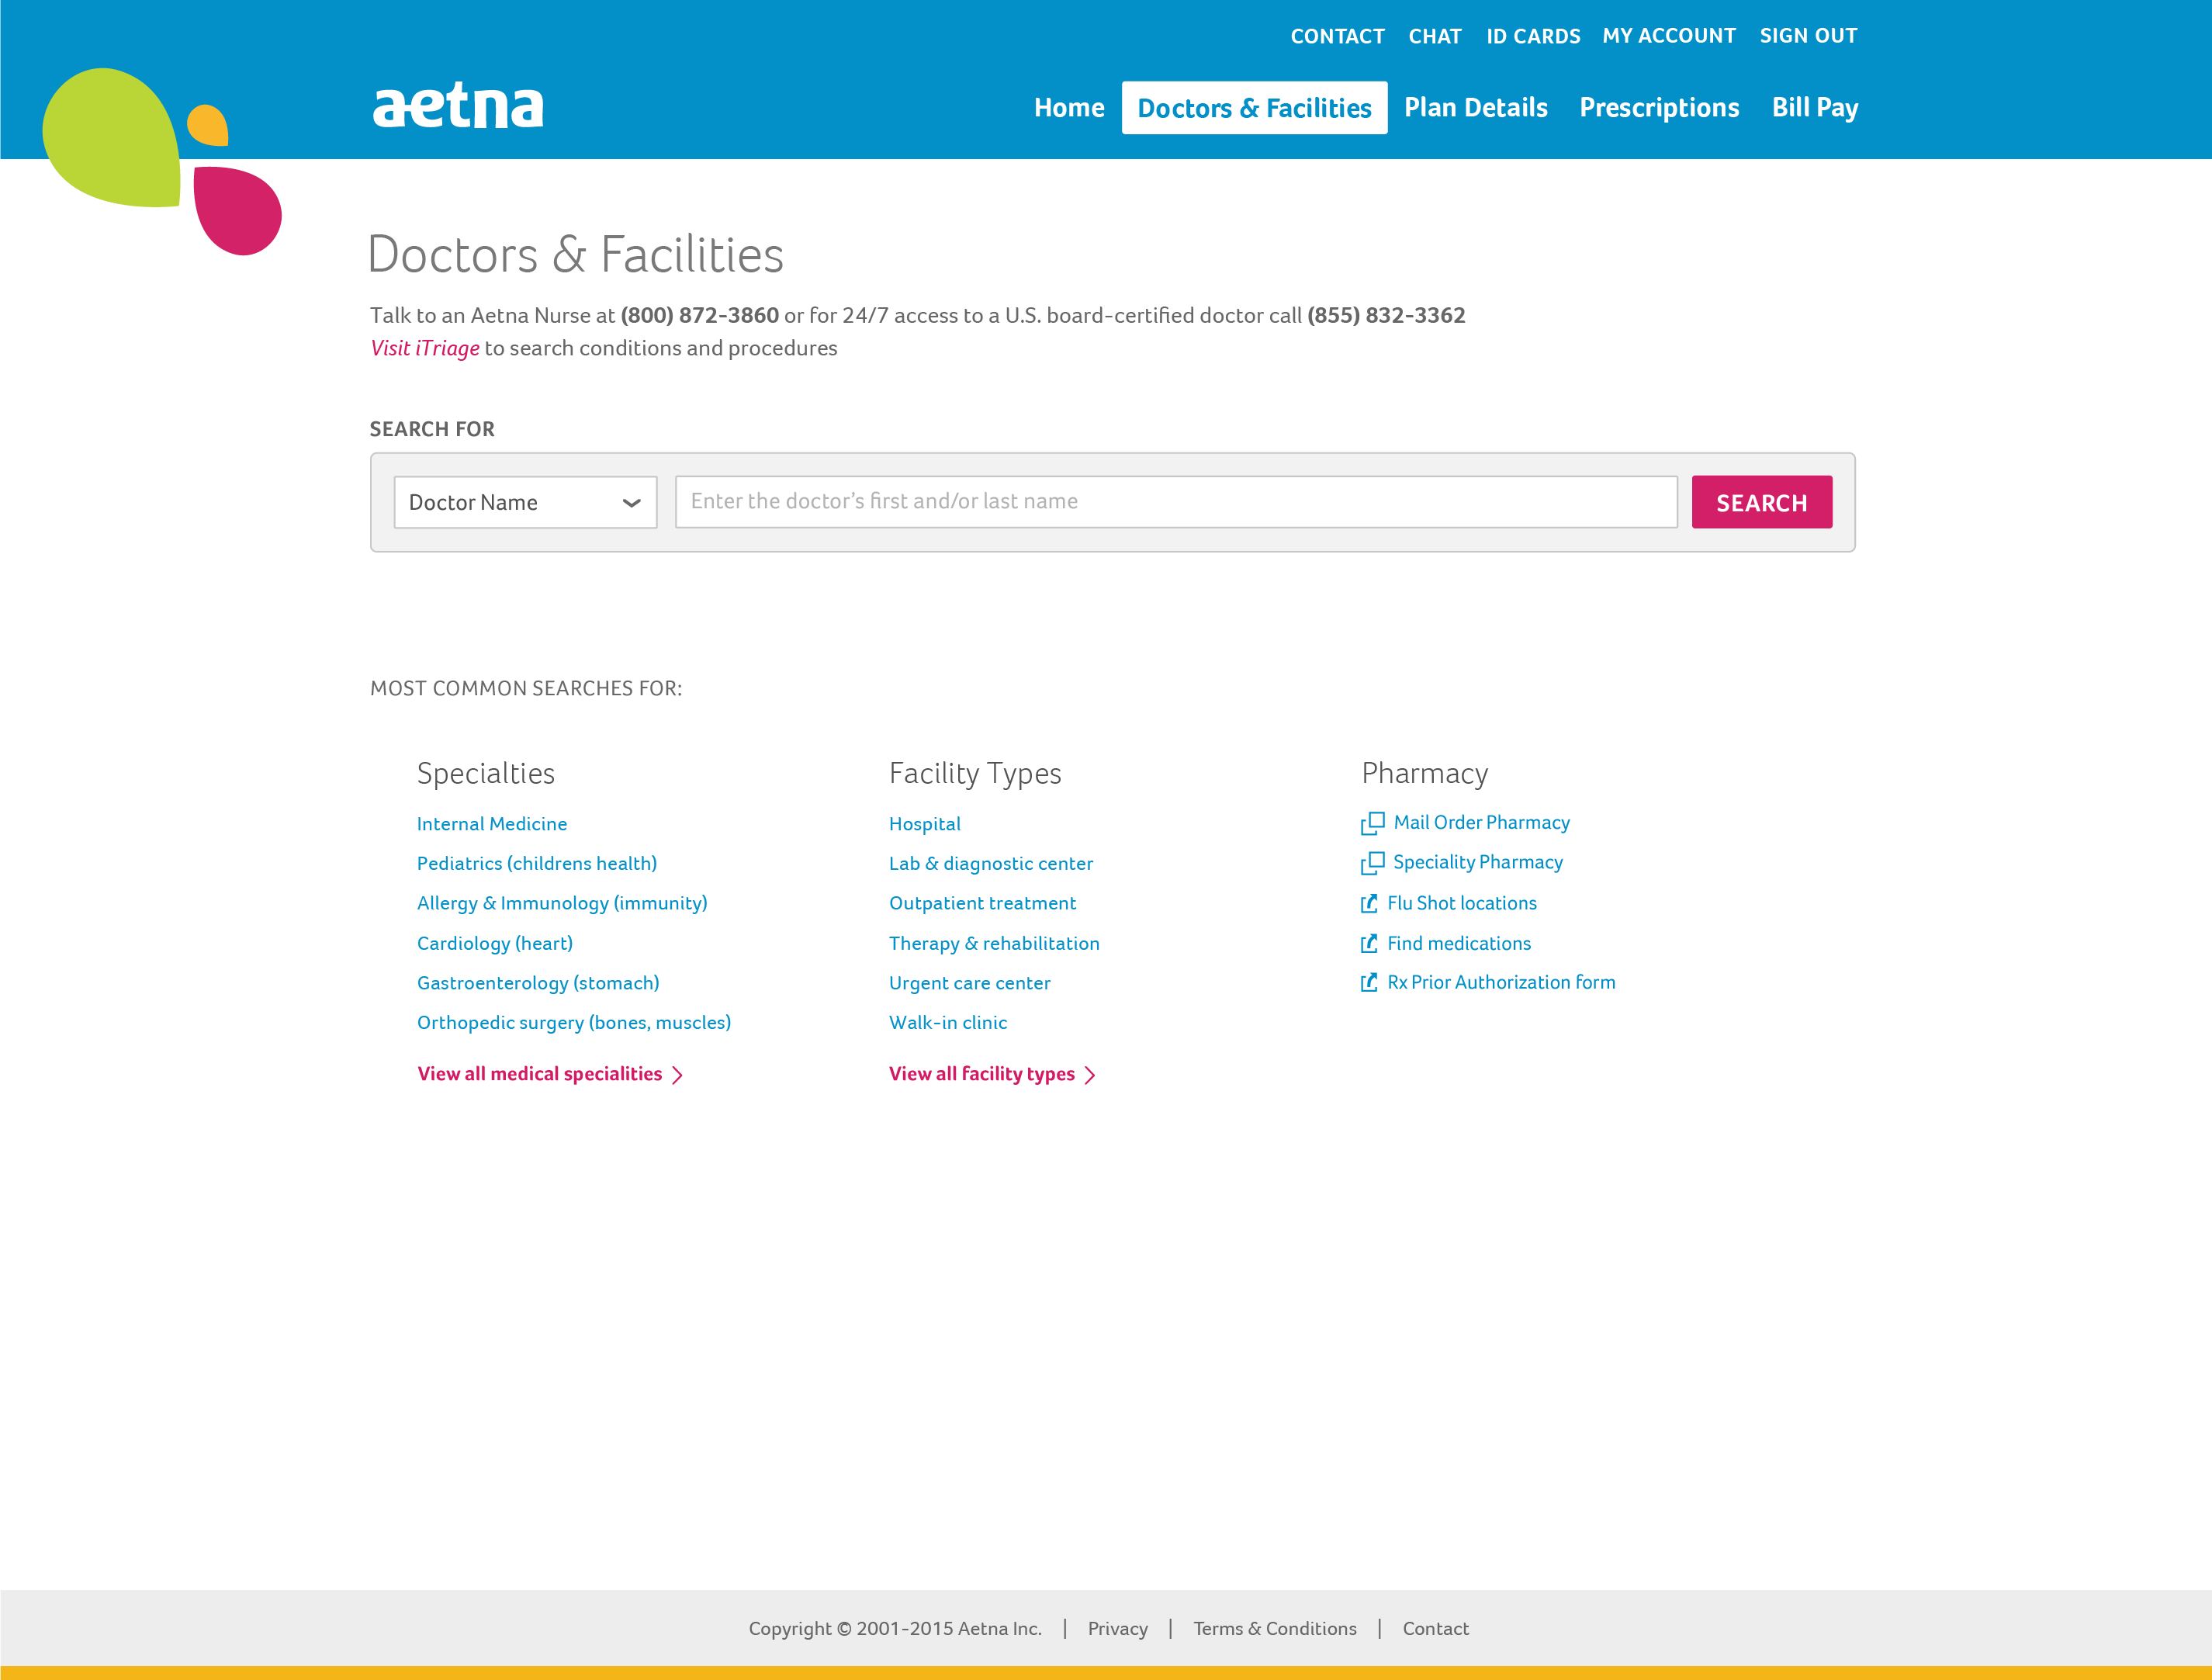 aetna member central / doctors and facilities search